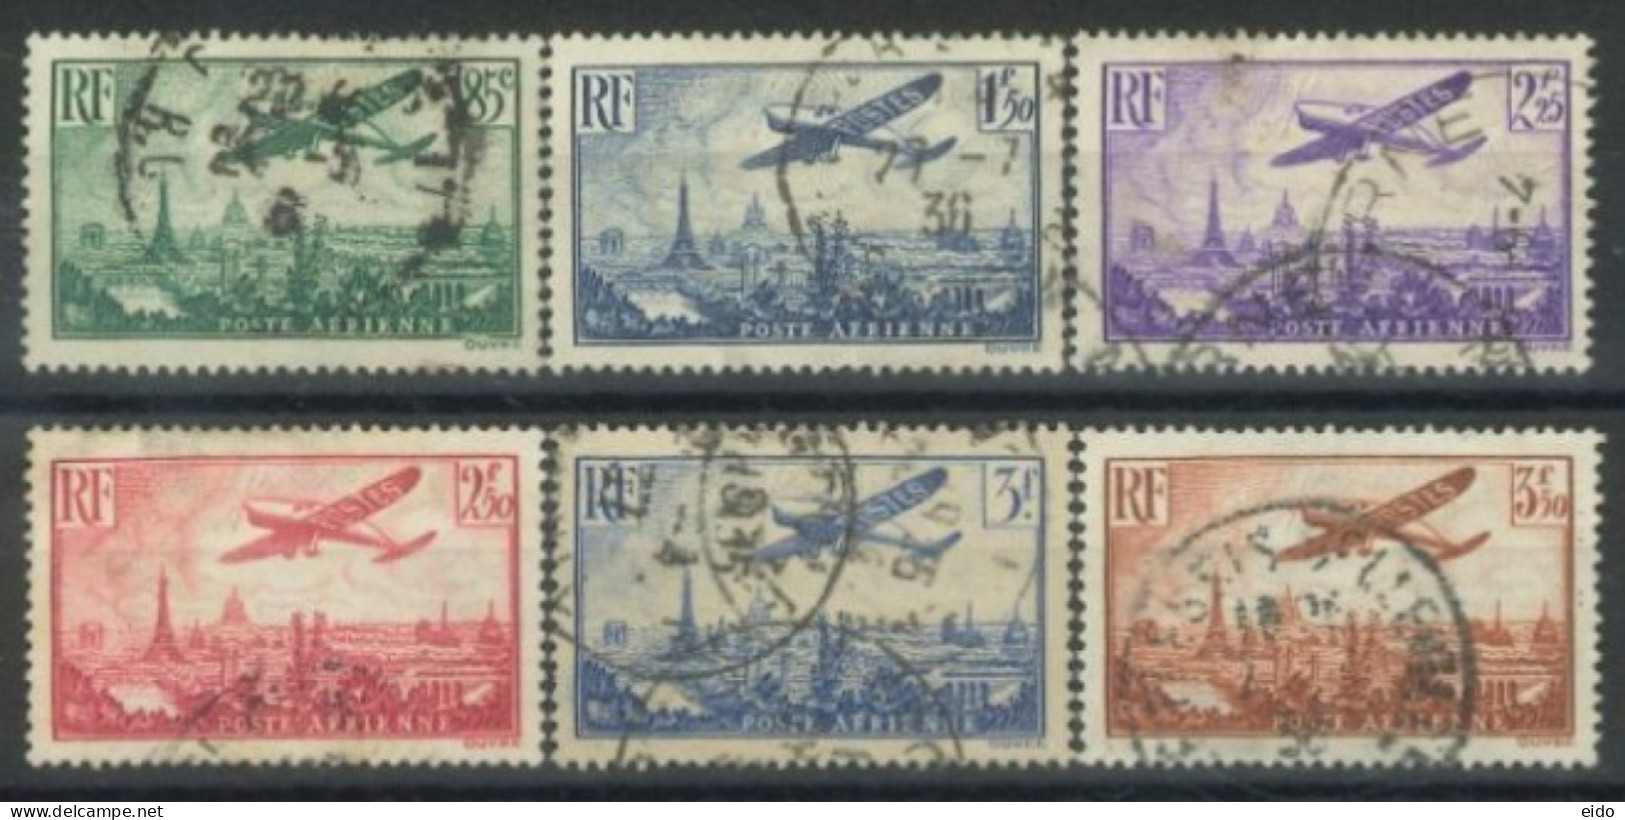 FRANCE - 1936 - PLANE FLYING OVER PARIS STAMPS COMPLETE SET OF 6,  # 8/13, USED - Used Stamps